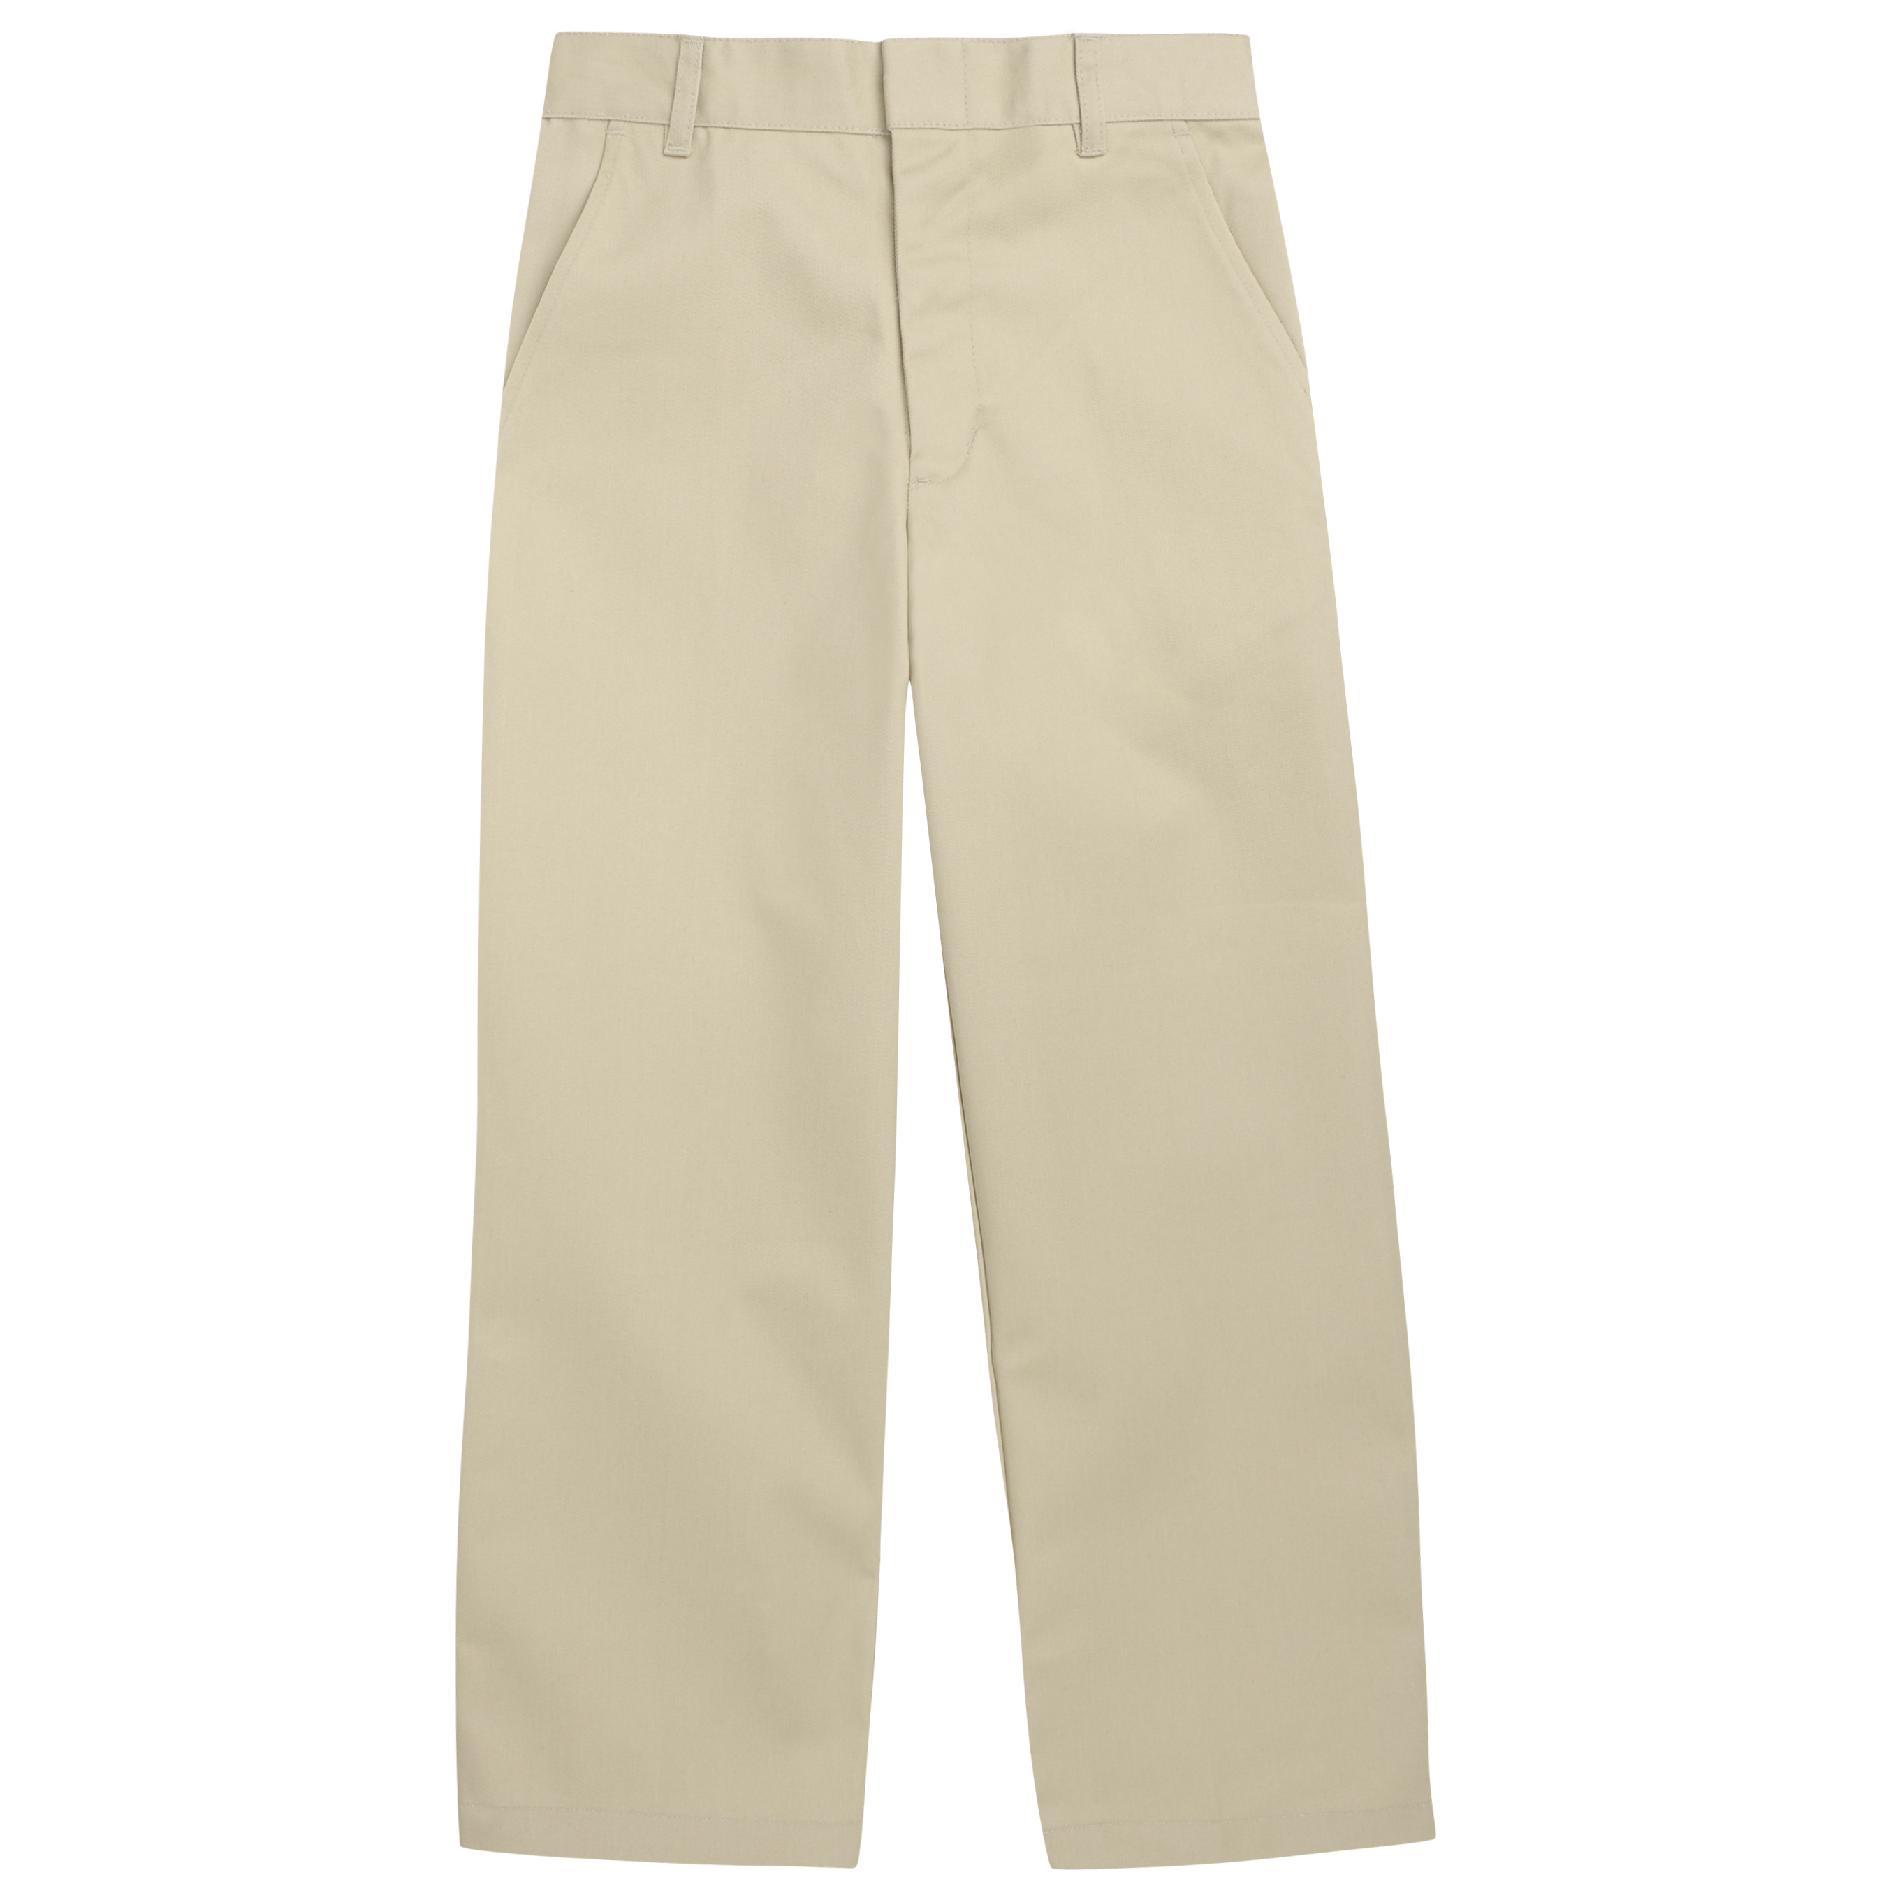 At School by French Toast Young Men 40-44 Twill Pant (Khaki)